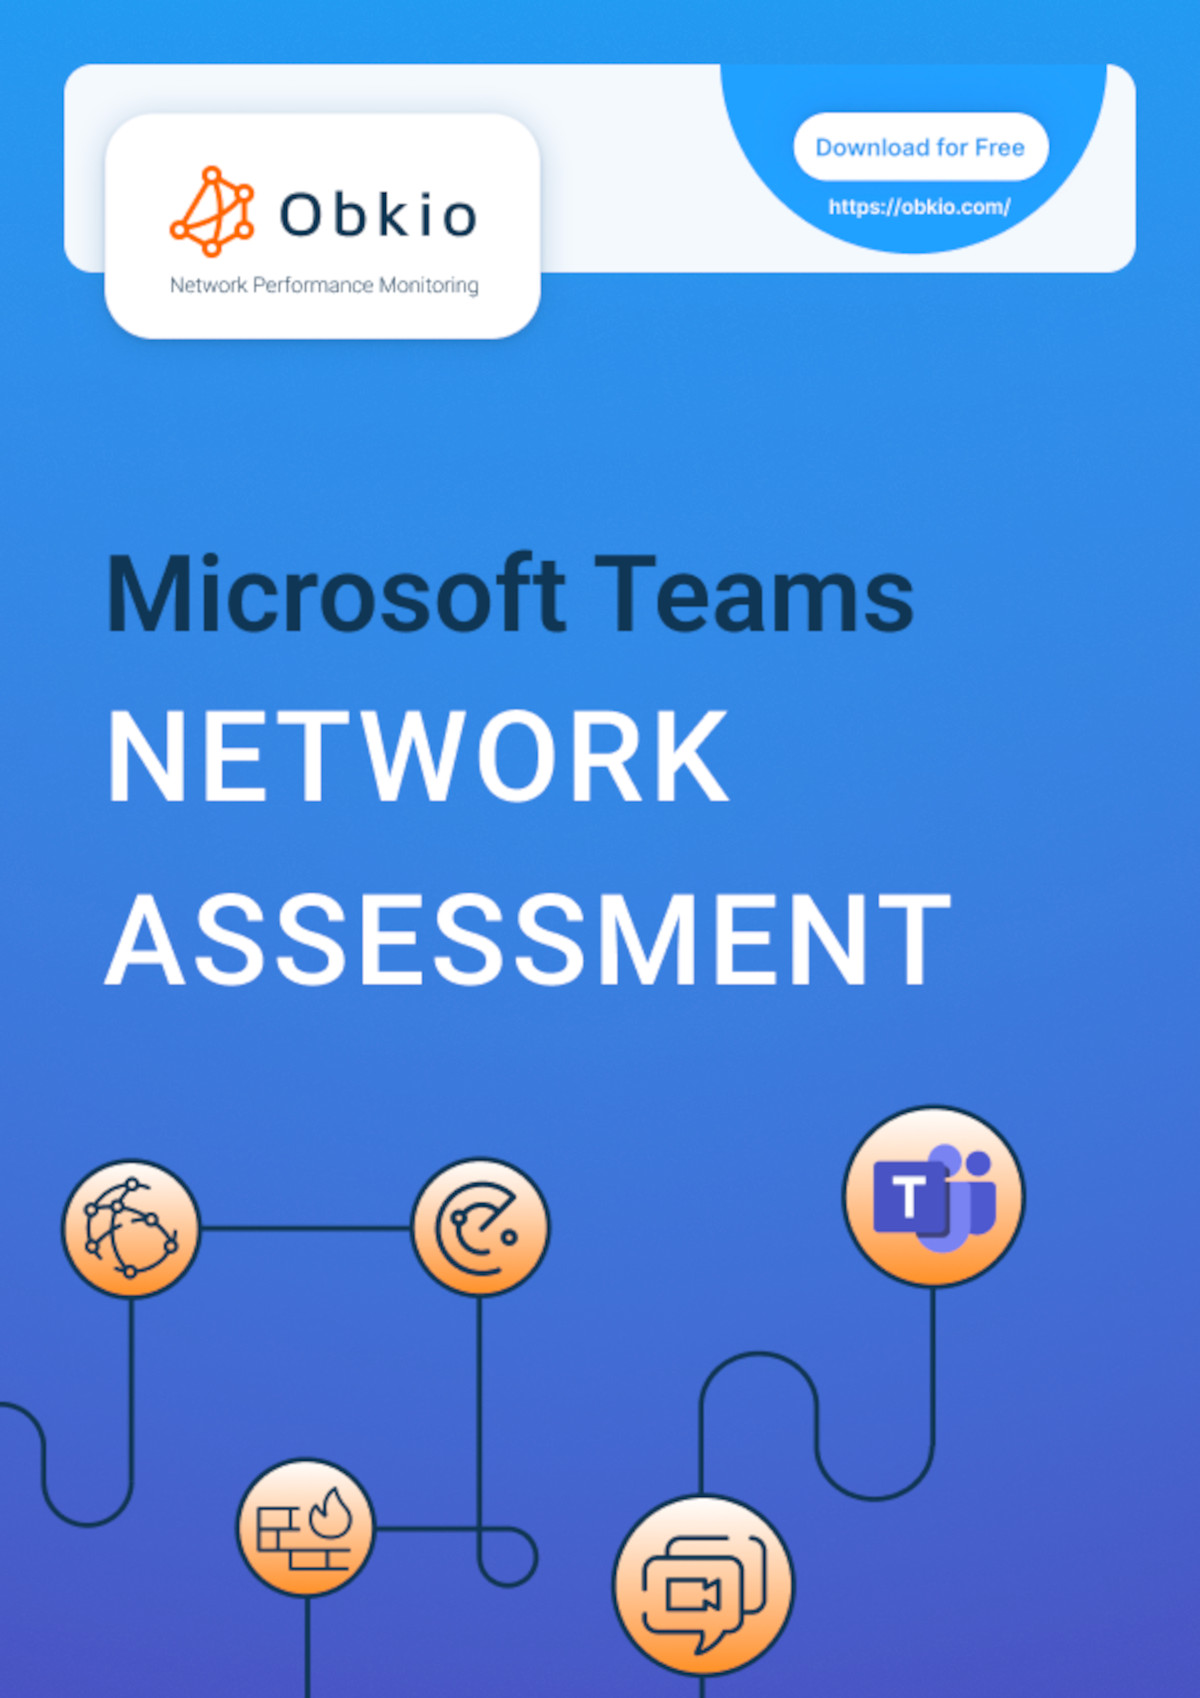 The Microsoft Teams Network Assessment Template